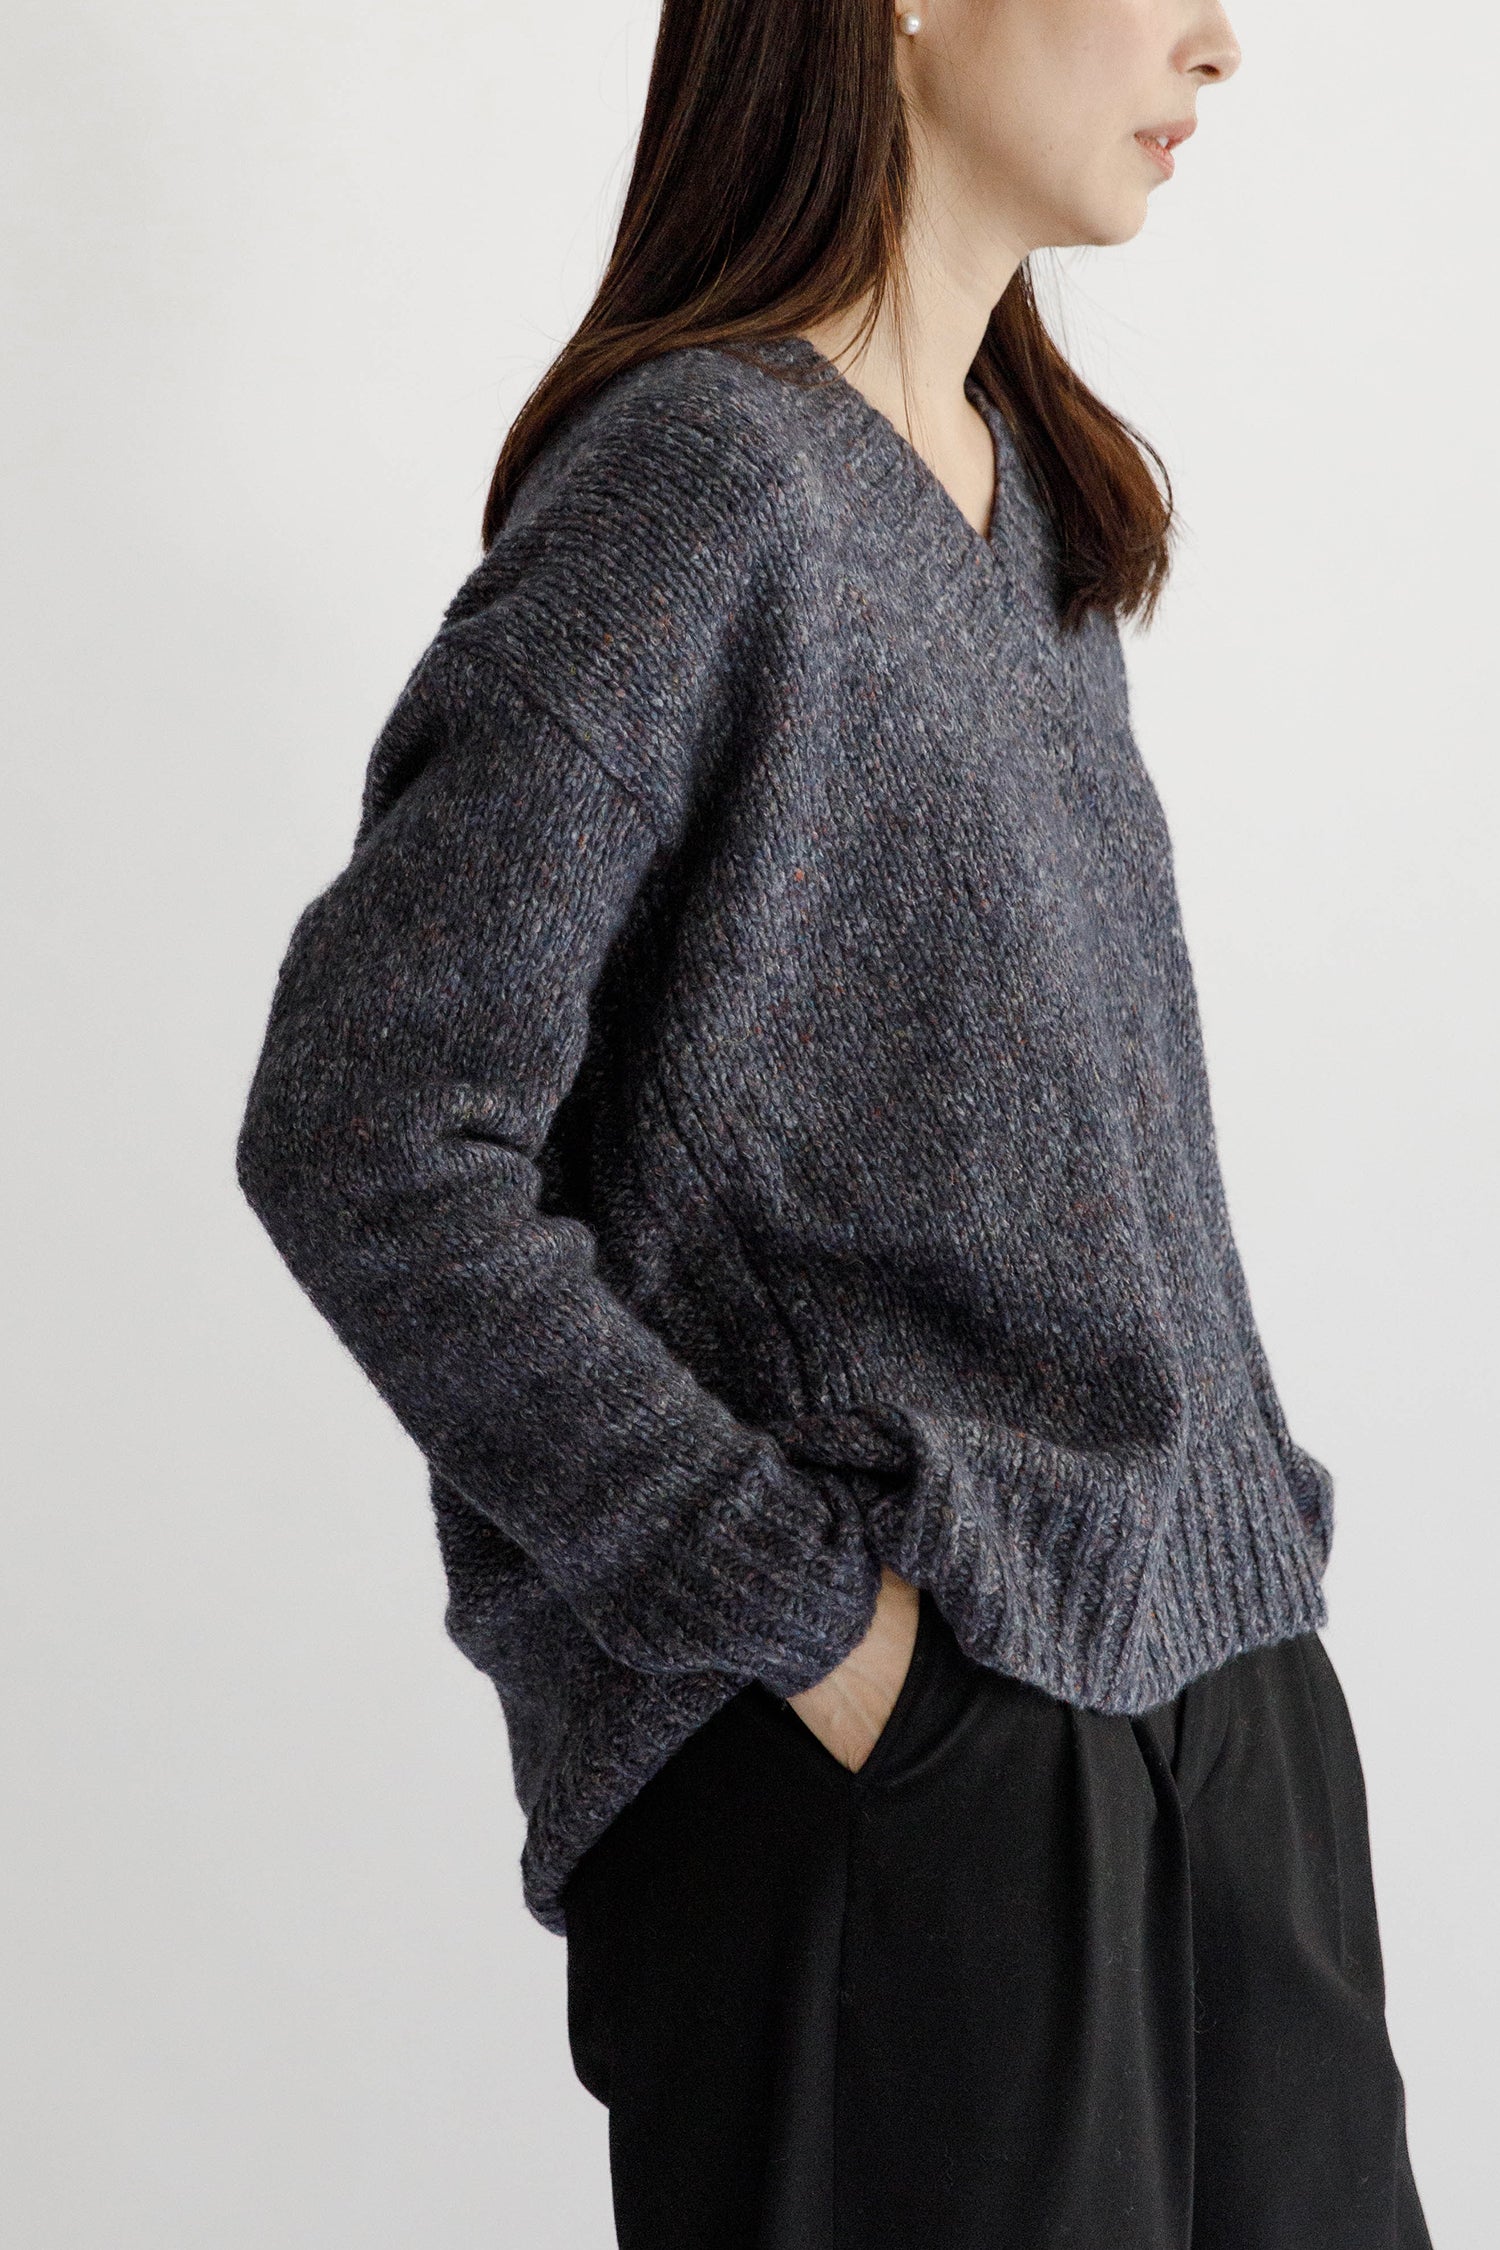 23AW Wool cotton nep V-neck pullover /CT23311